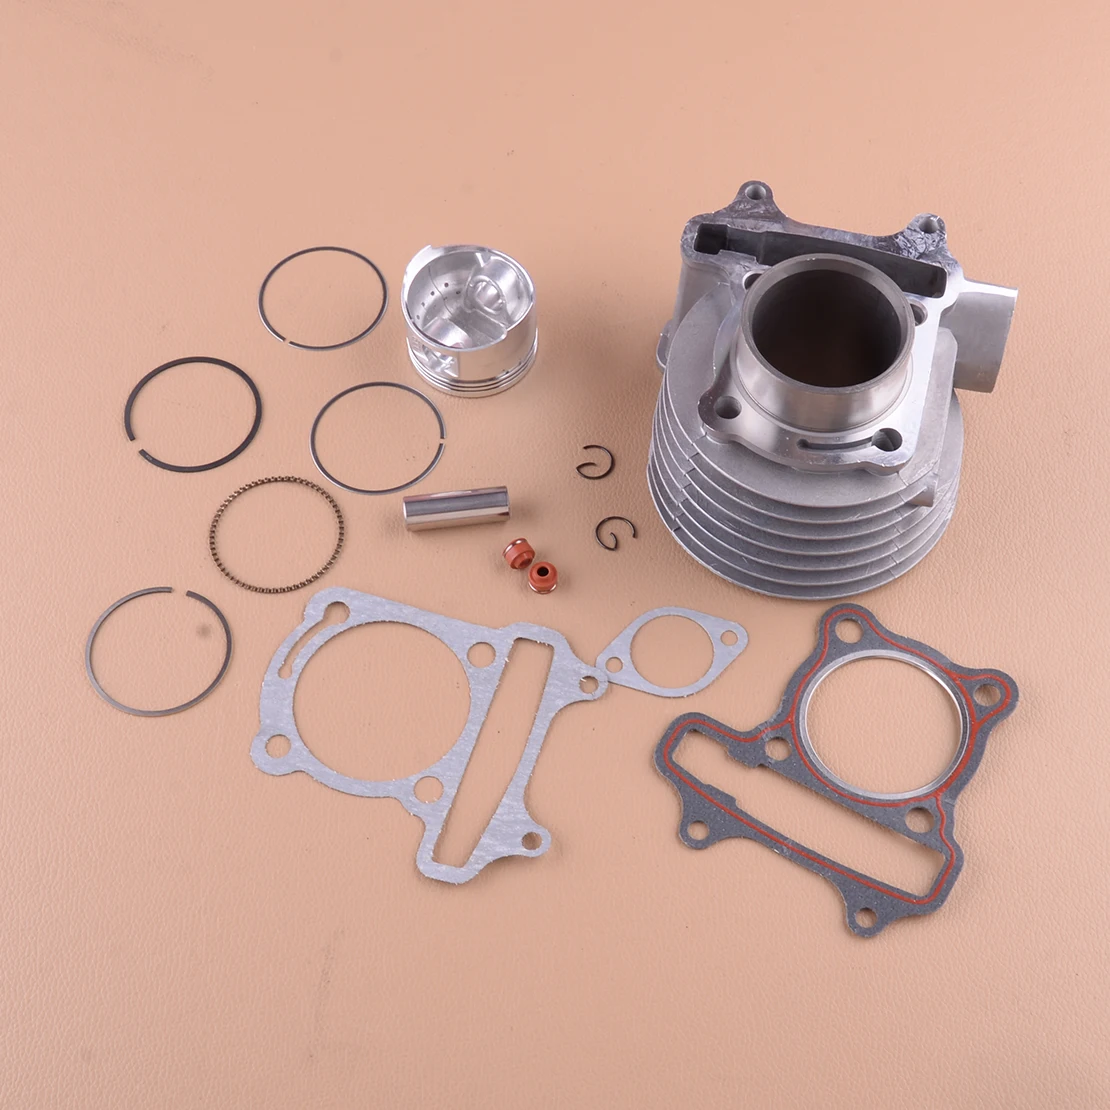 

New Motorcycle Big Bore 50mm Cylinder Kit With Piston Ring Pin Fit for 139QMB GY6 50cc 80cc 100cc Scooter Moped Replacement